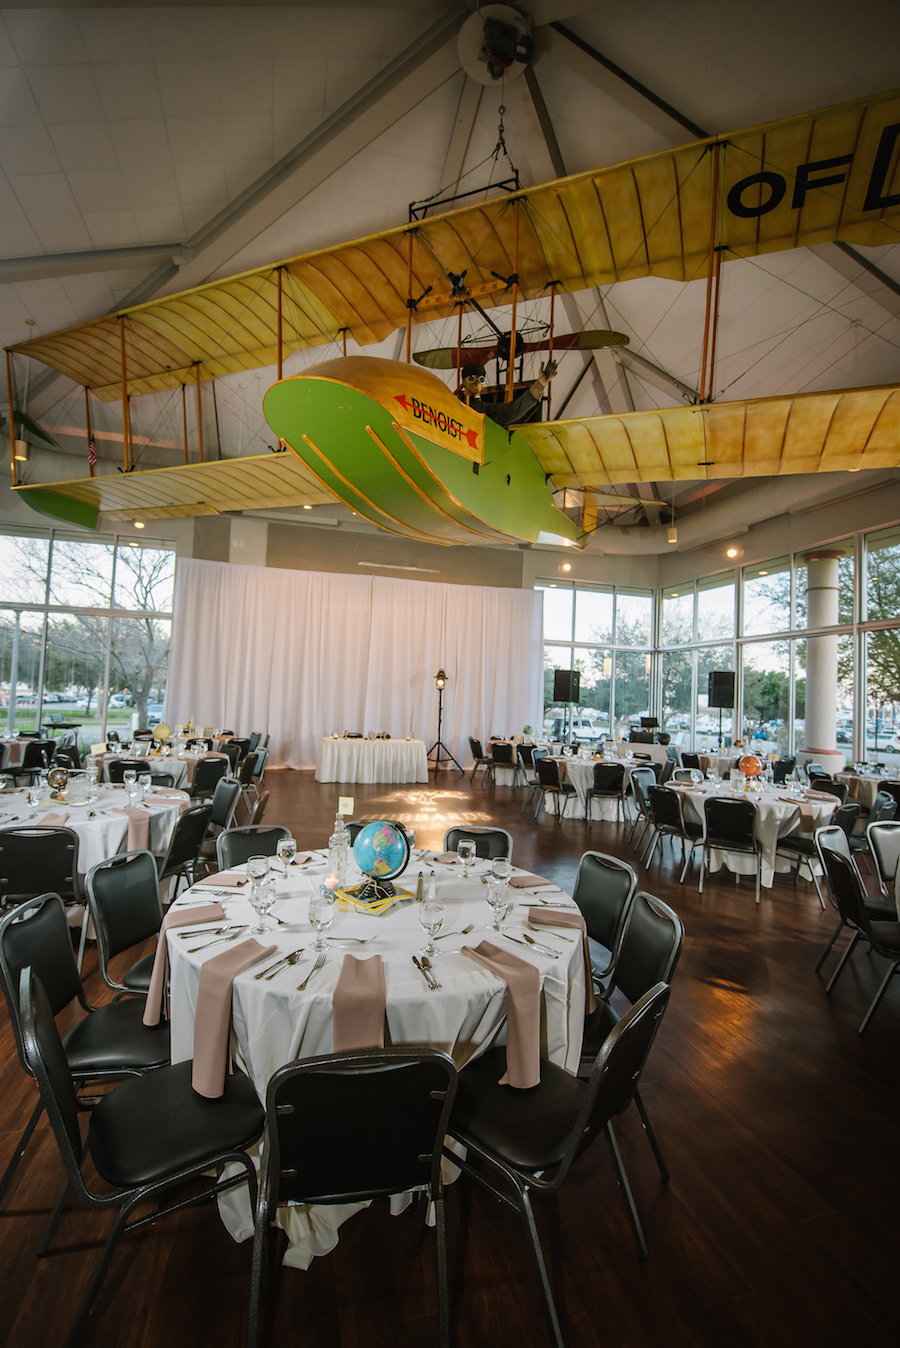 Eclectic Travel Inspired St. Petersburg Wedding in Airport Hanger Museum with Globes, National Geographic Magazines